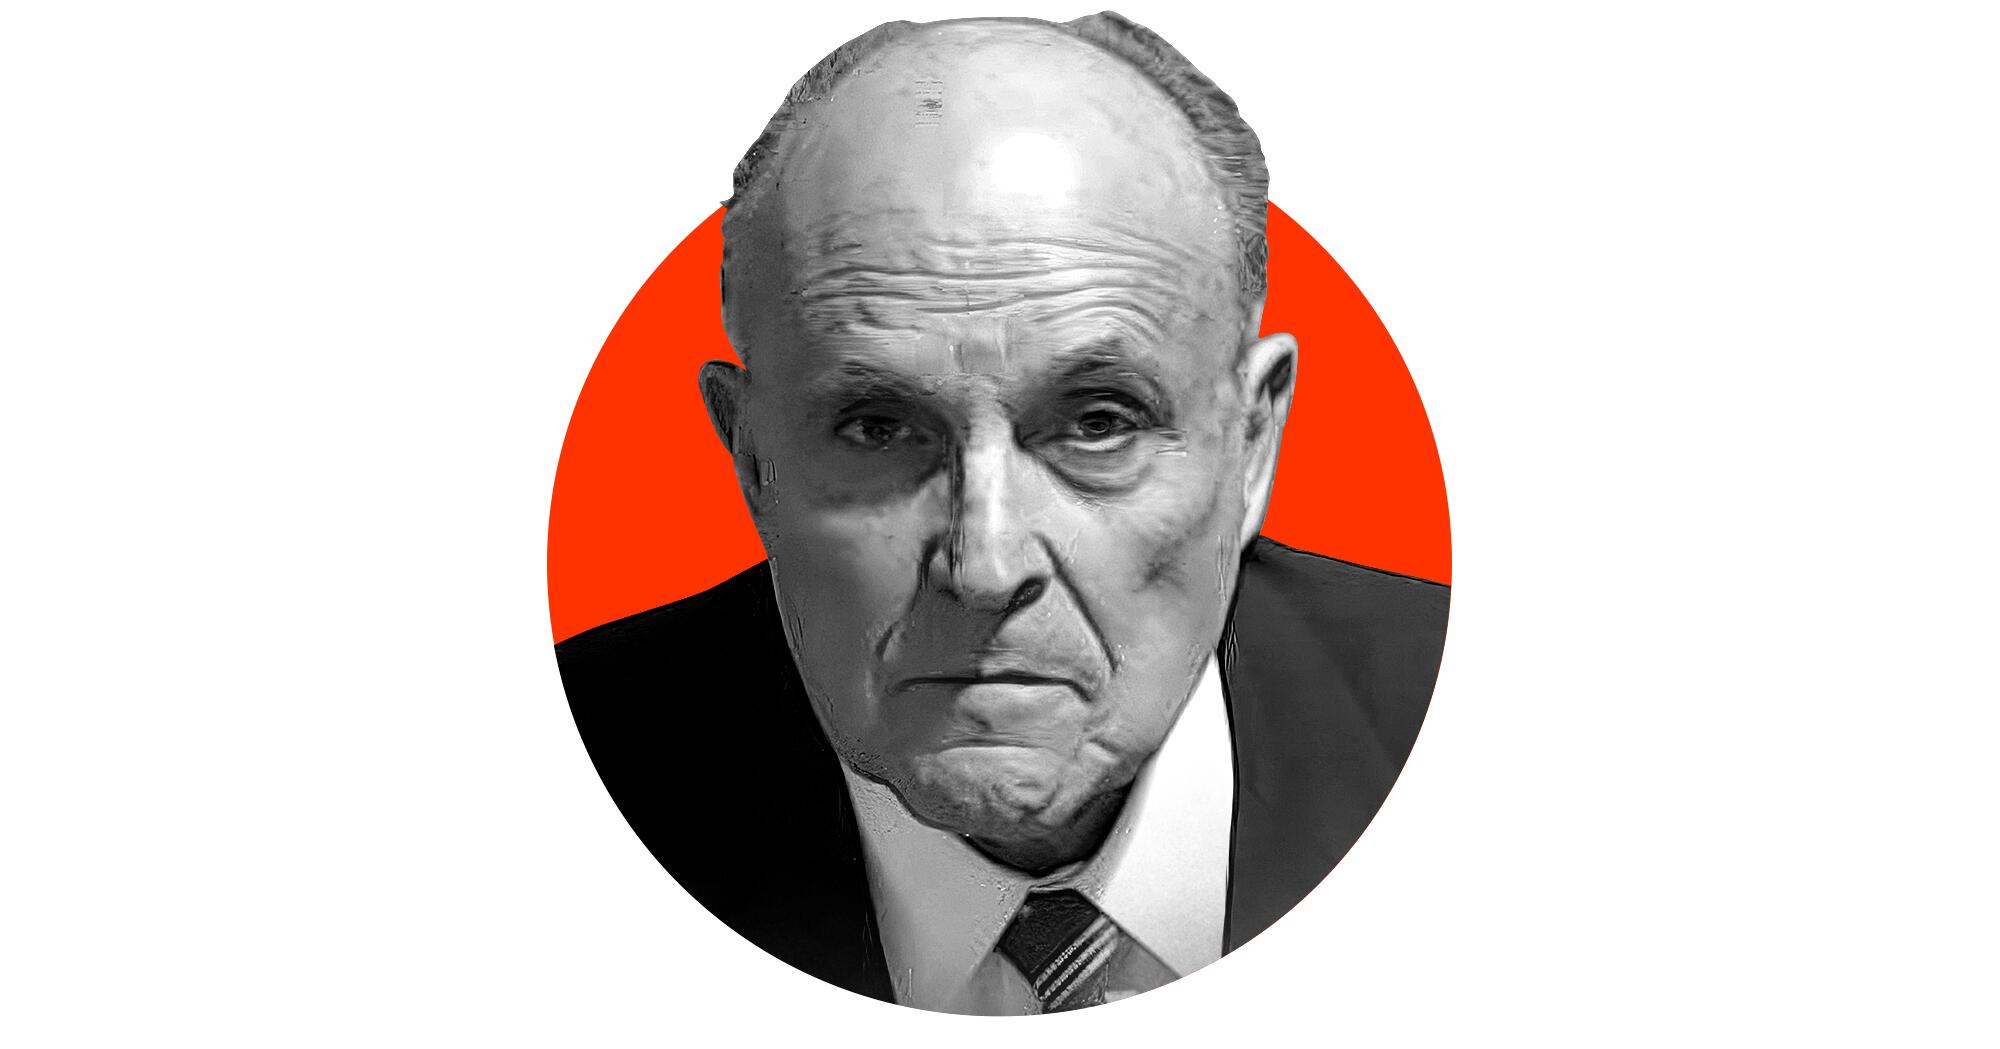 A photo illustration of a black-and-white police booking photo of Rudolph W. Giuliani emerging from a red circle